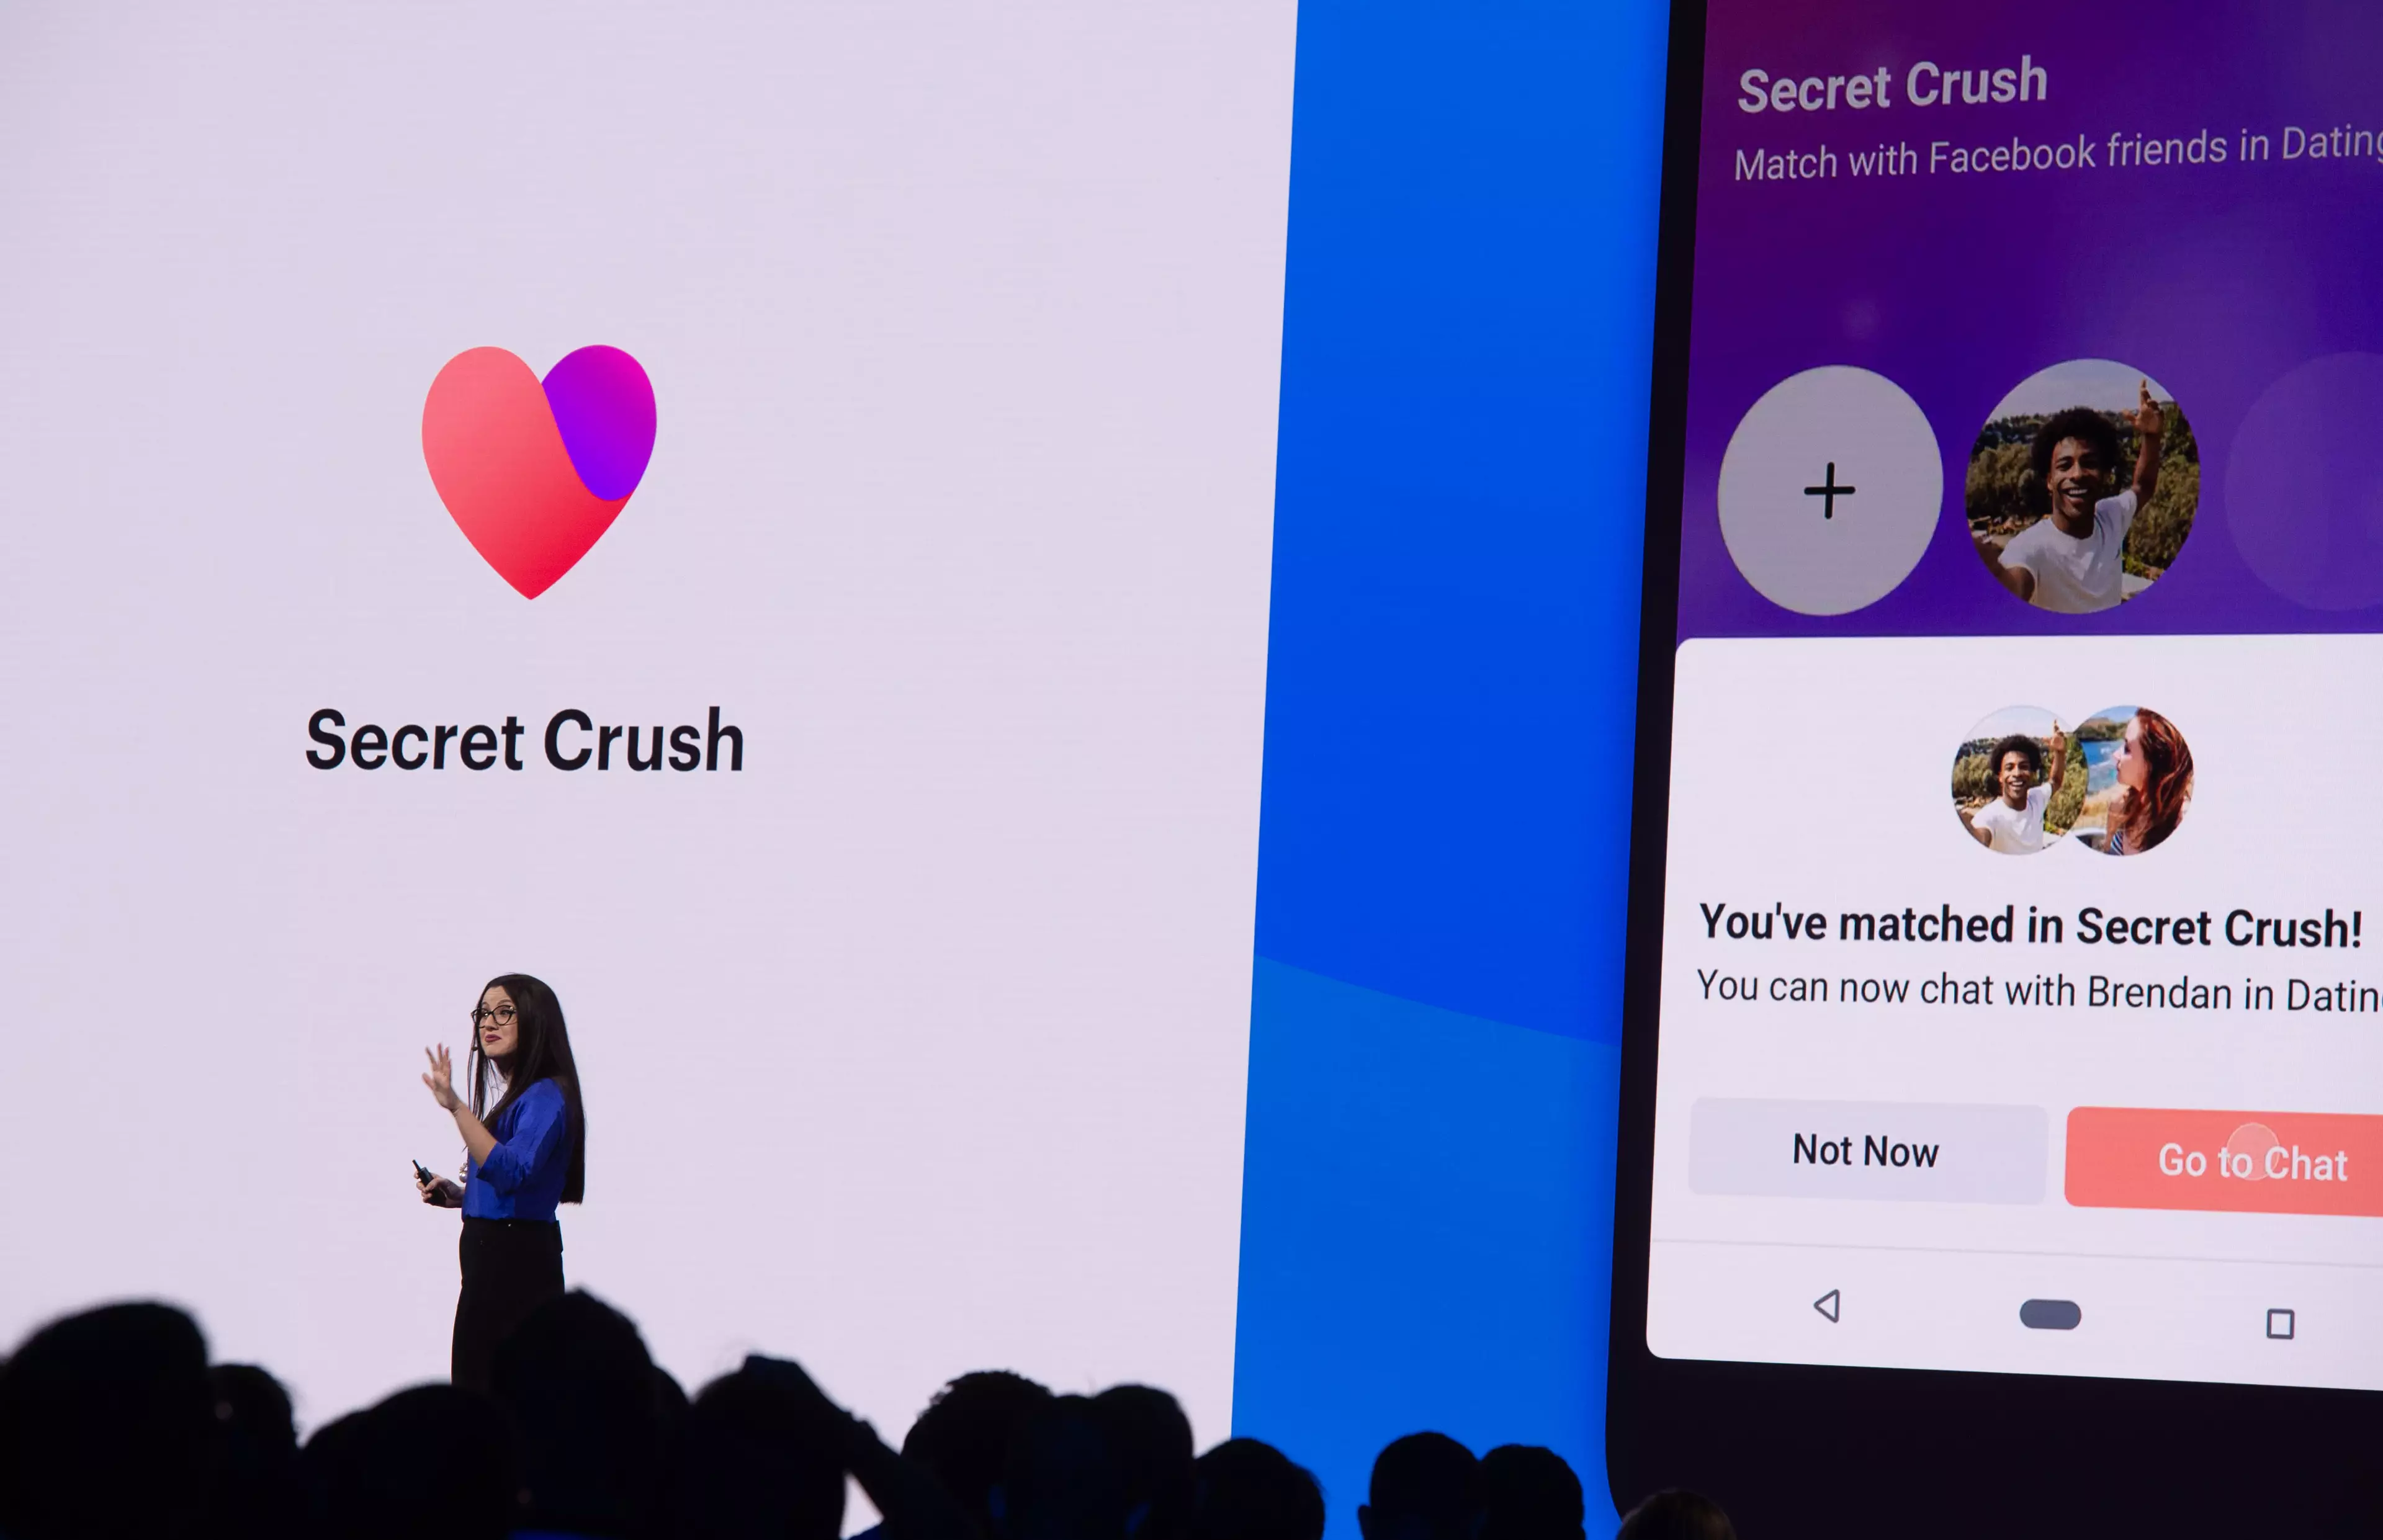 The Secret Crush feature was announced at Facebook's F8 developer conference in April.